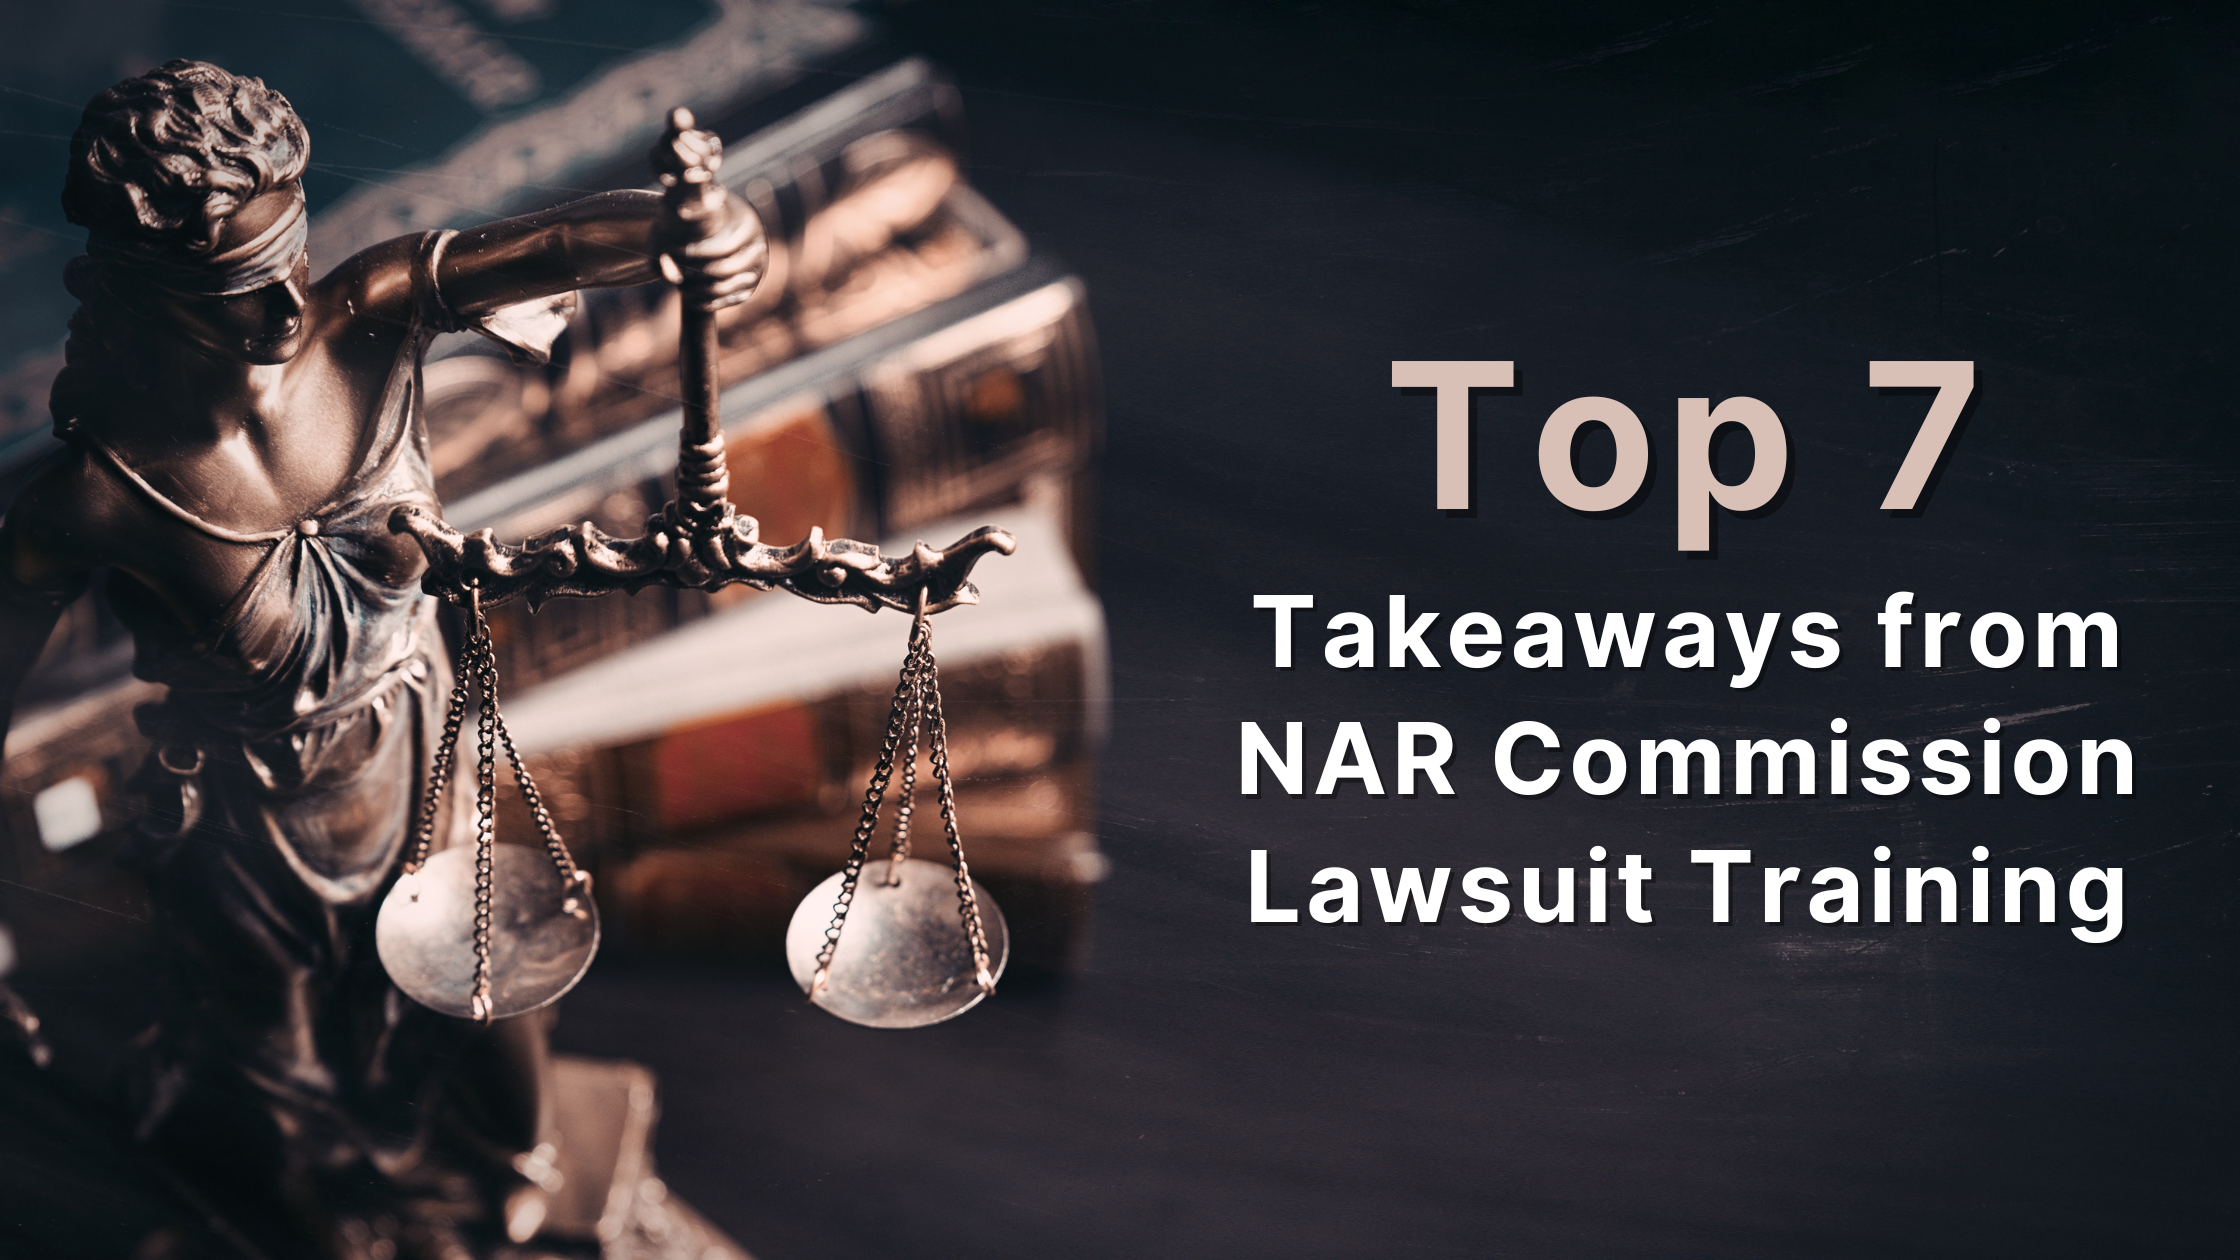 Top 7 Takeaways from NAR Commission Lawsuit Training